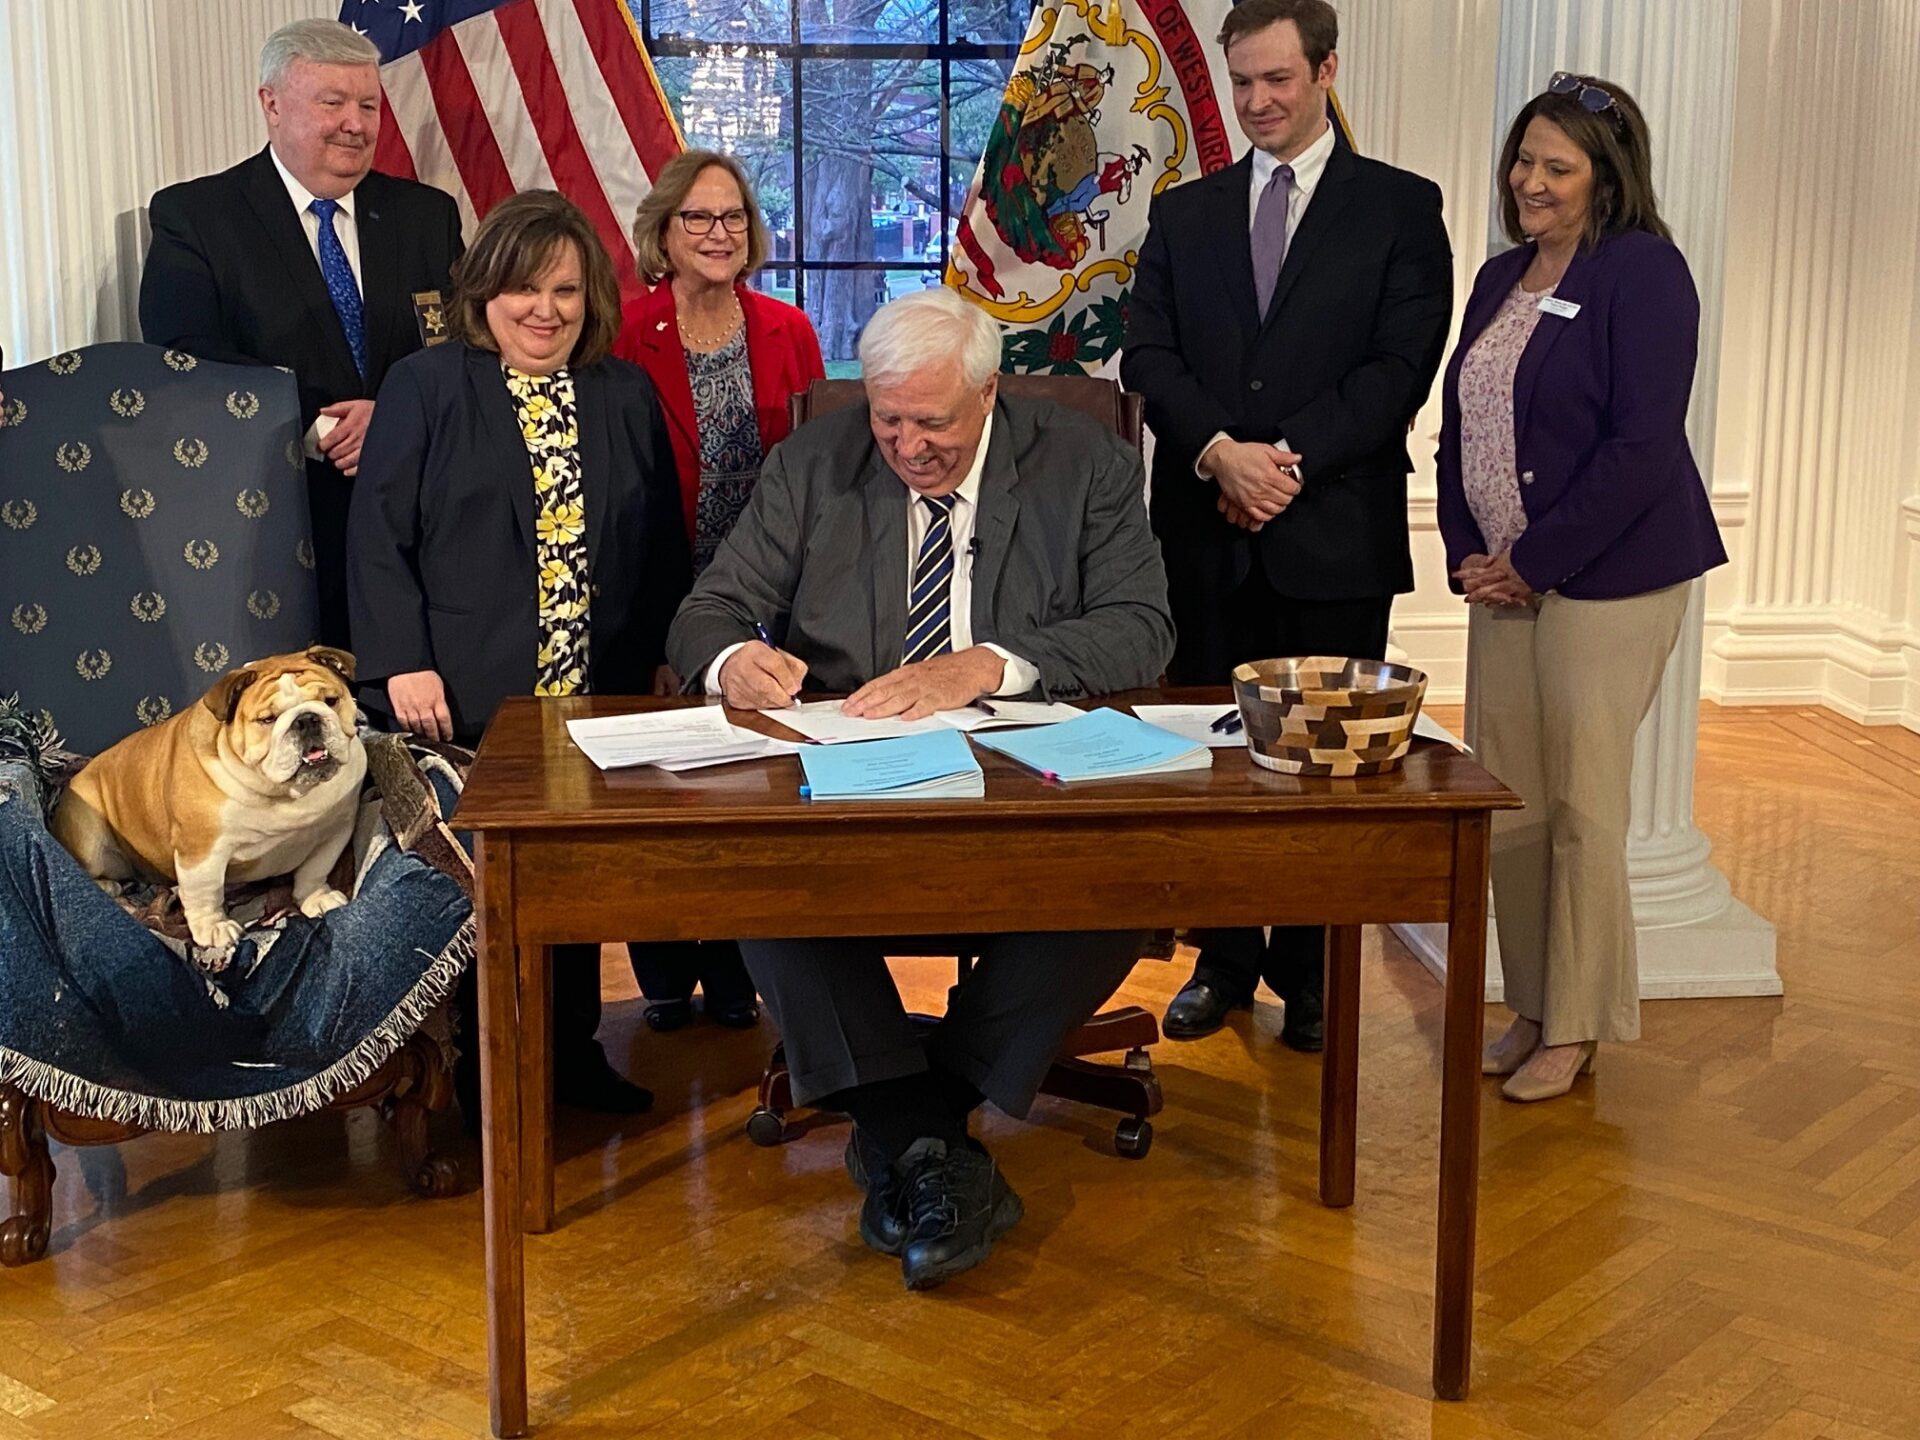 The Governor, with his English Bulldog Babydog at his side is in his grand reception room.